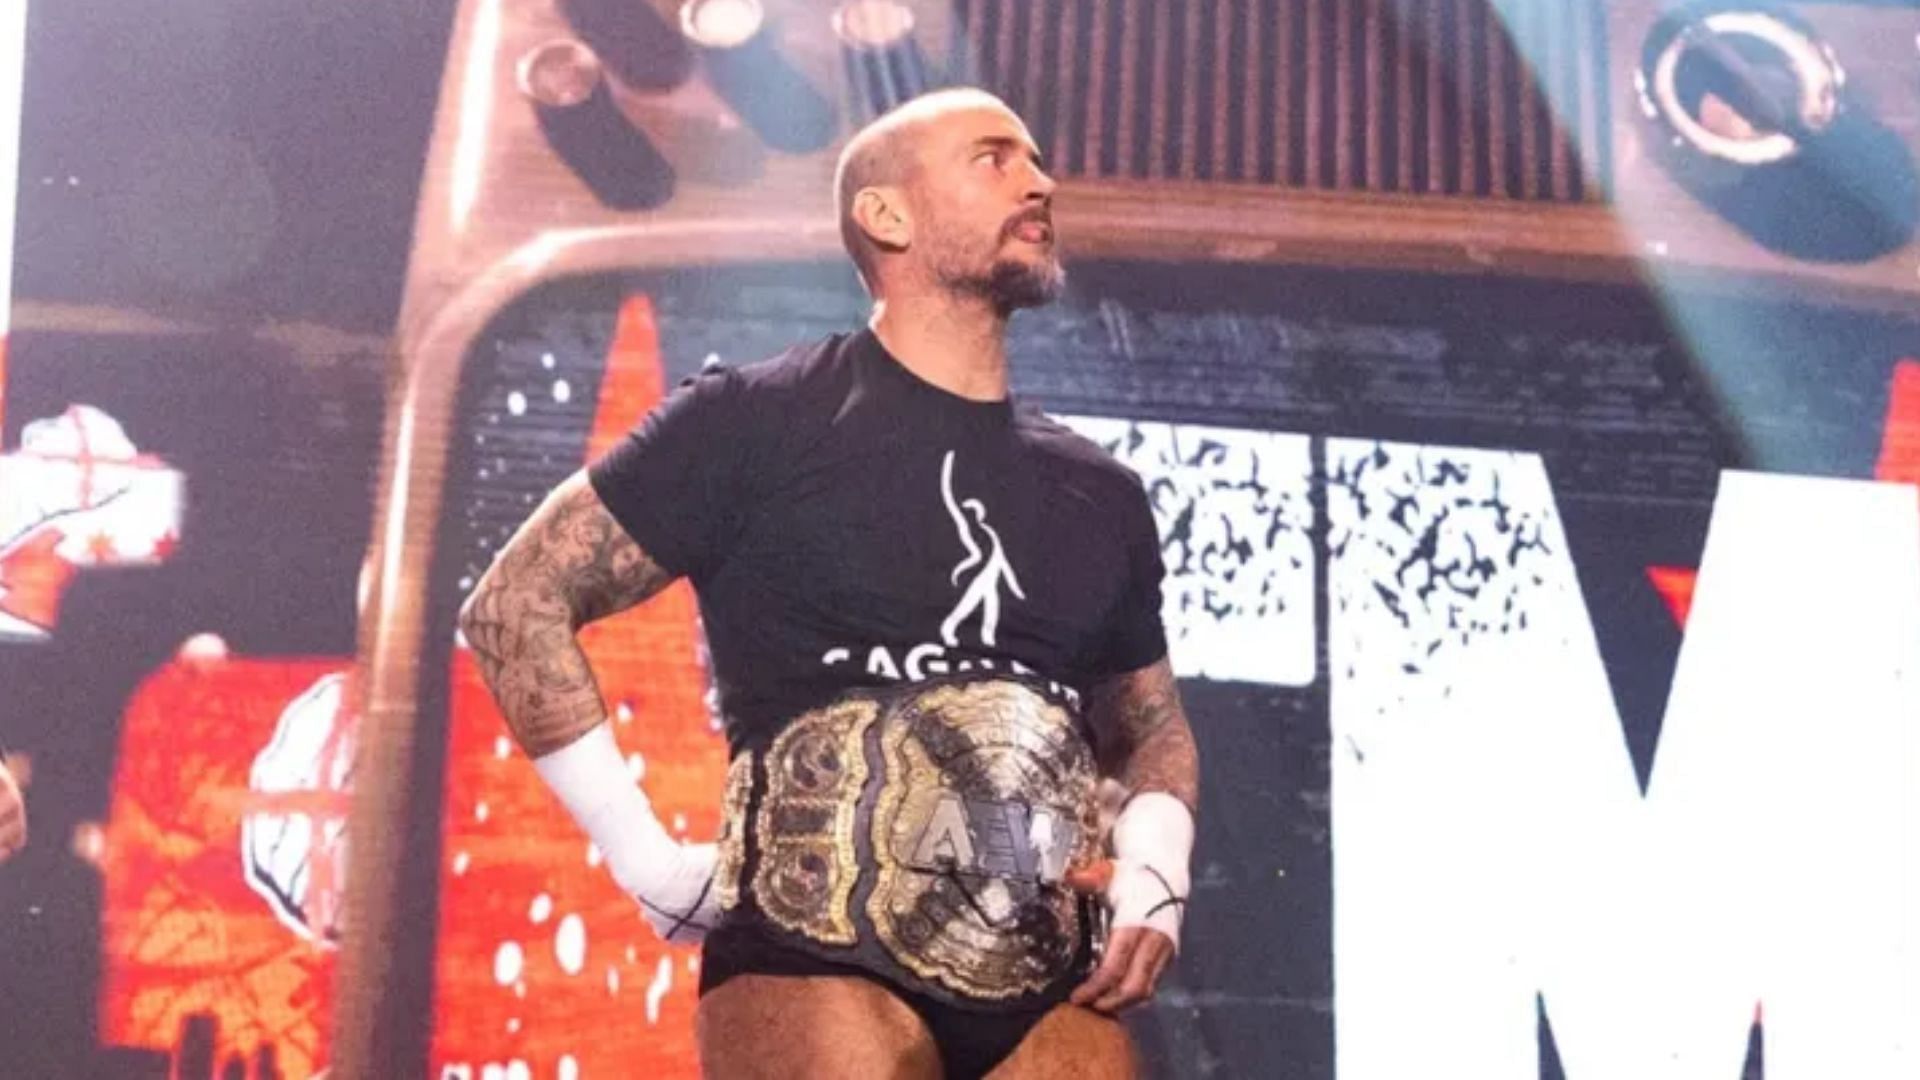 CM Punk was involved in a backstage altercation at AEW All In.